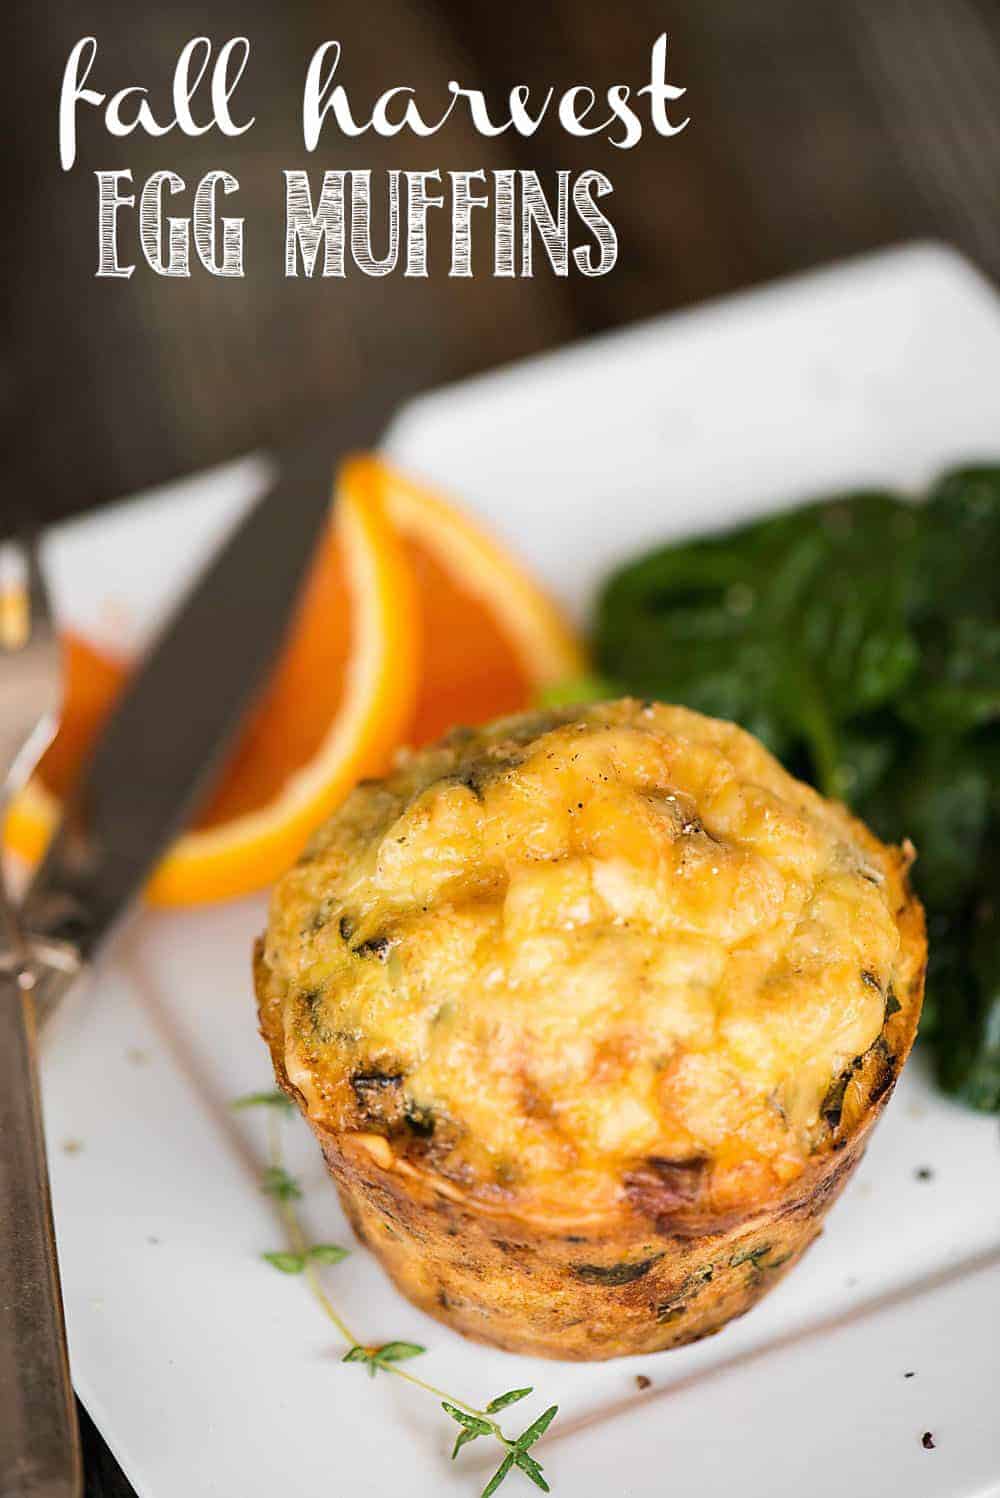 fall harvest egg muffin, with an orange and knife in the background